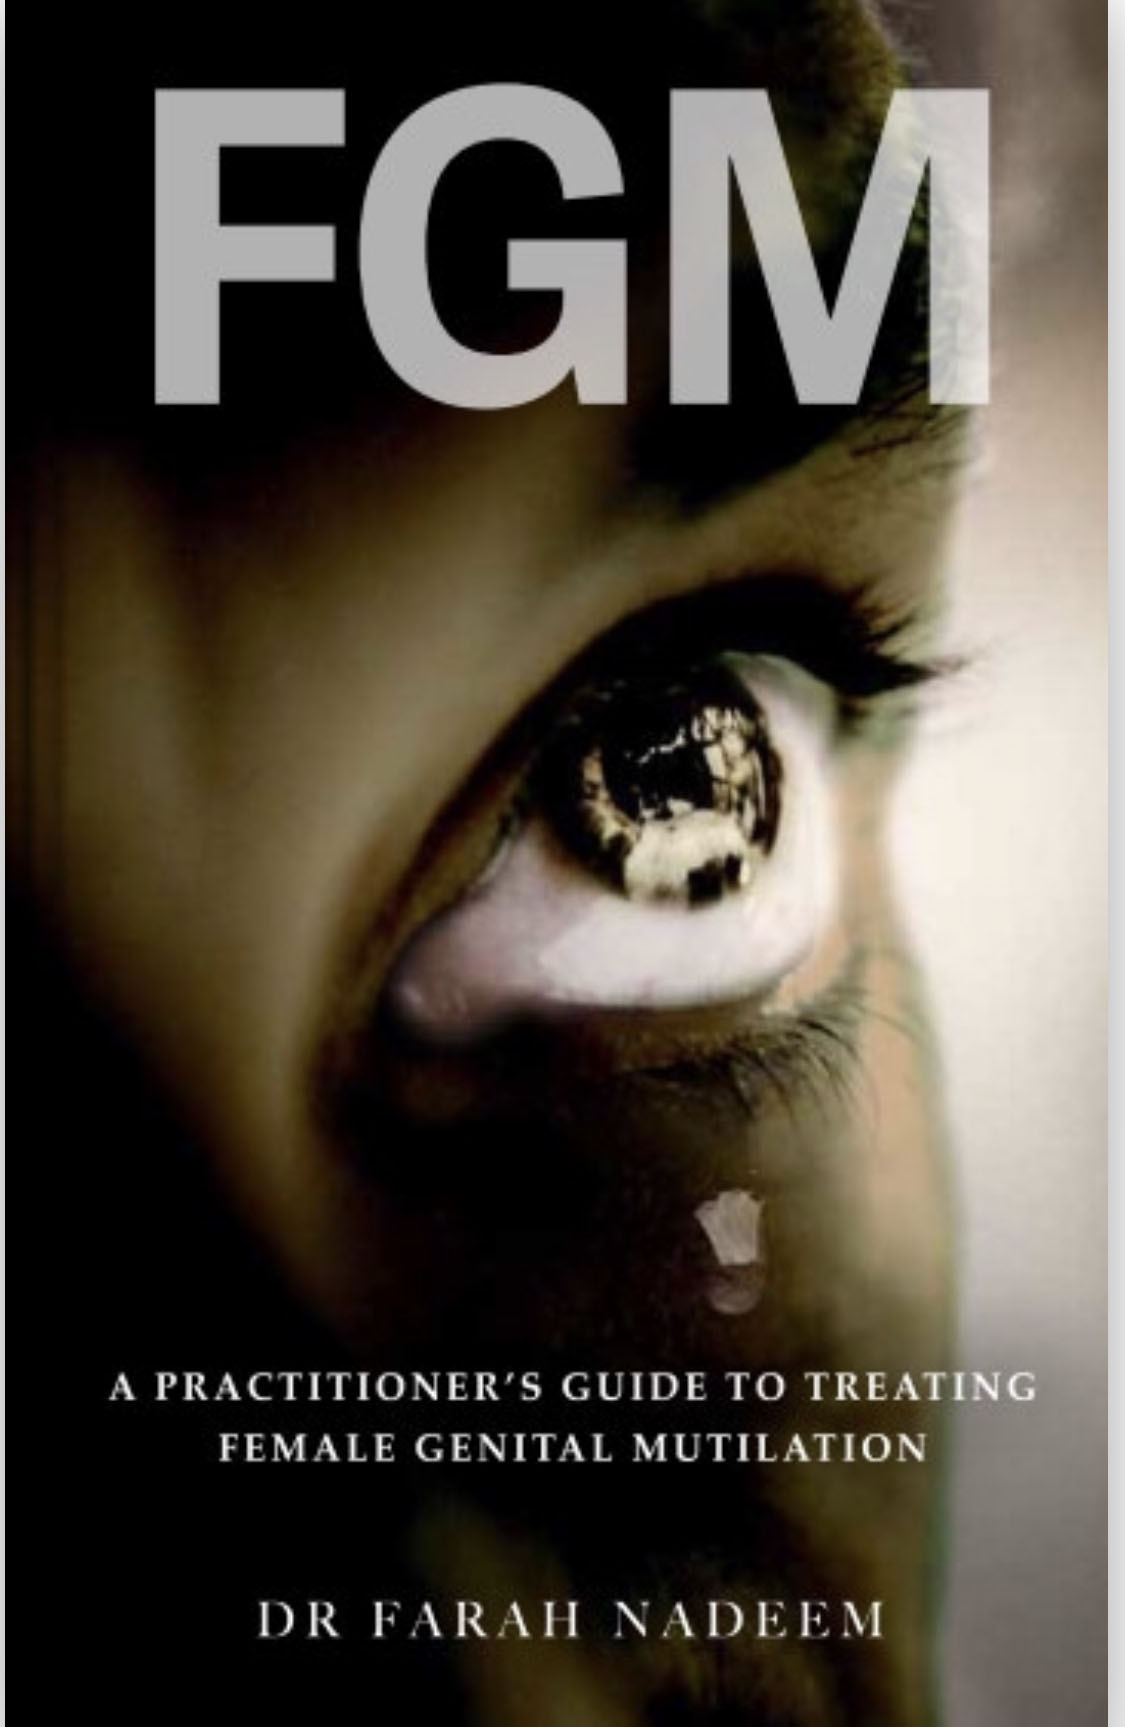 Image - Psychology alumna publishes book to aid psychologists with treatment of gender violence